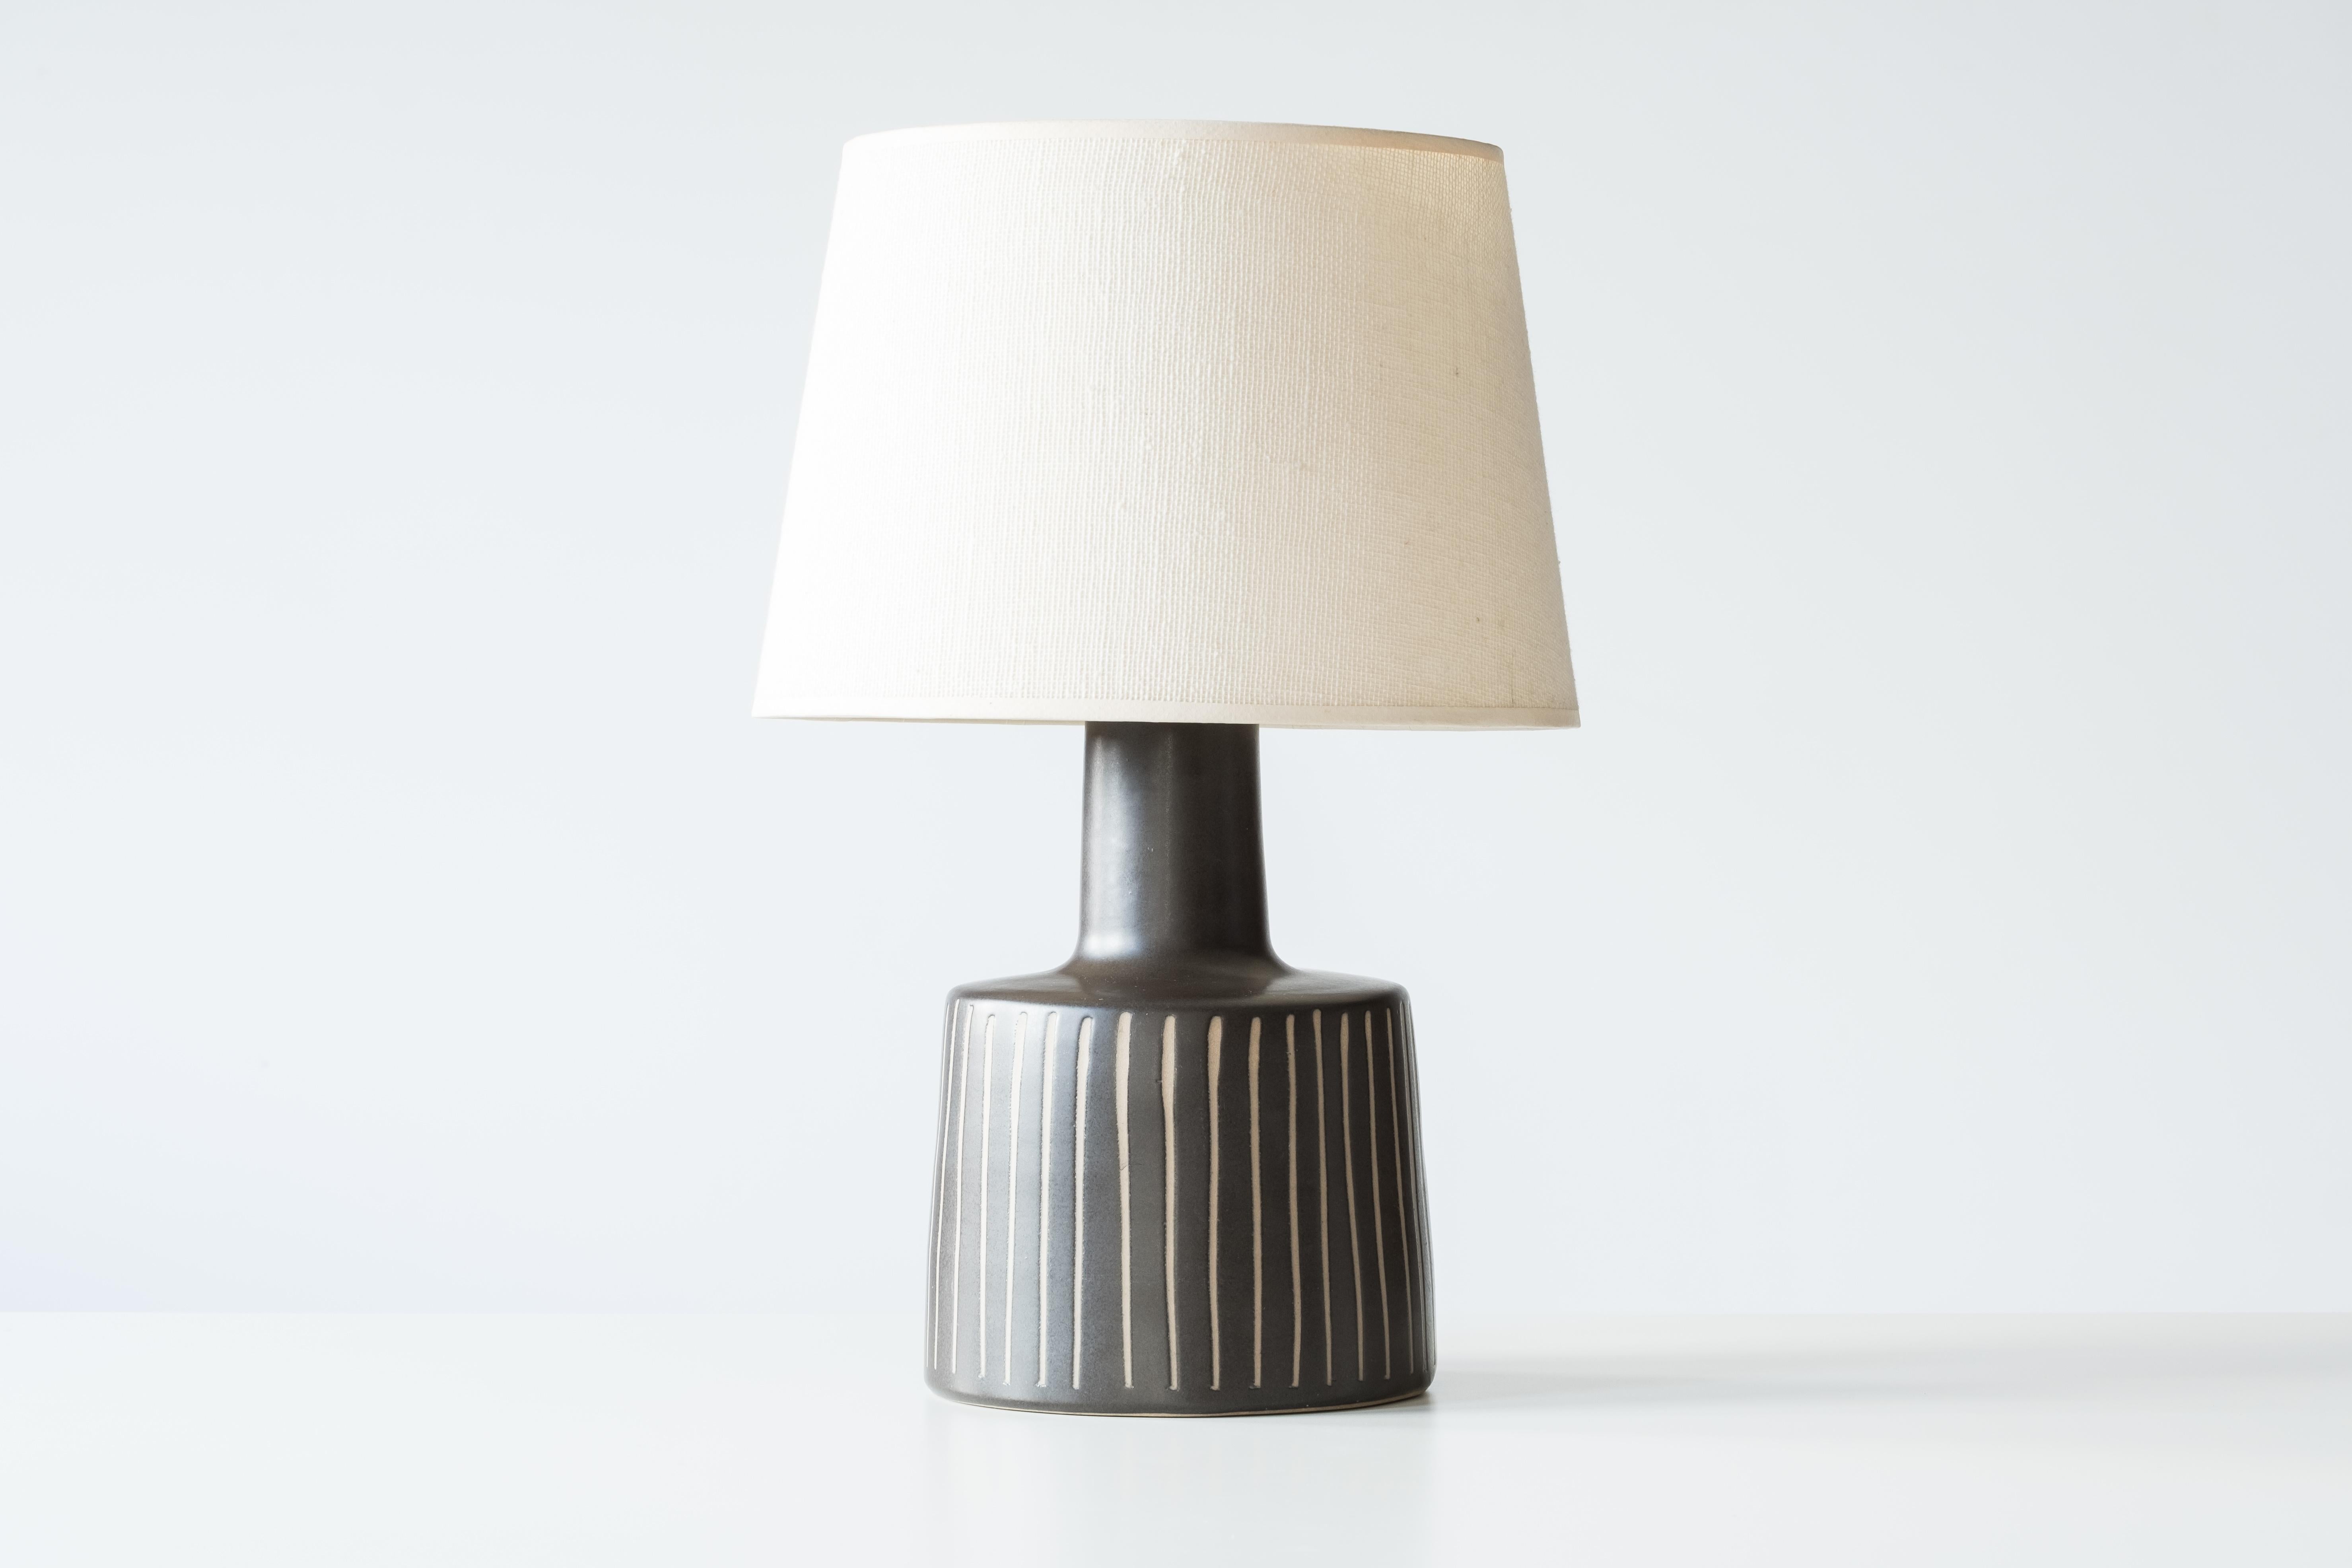 What is it?
—
Another gem from the masters of midcentury lightning – Gordon and Jane Martz.

This signed Martz model 105 lamp comes in a matte black / very dark brown glaze with a vertical stripe incised design. Technically this glaze is the